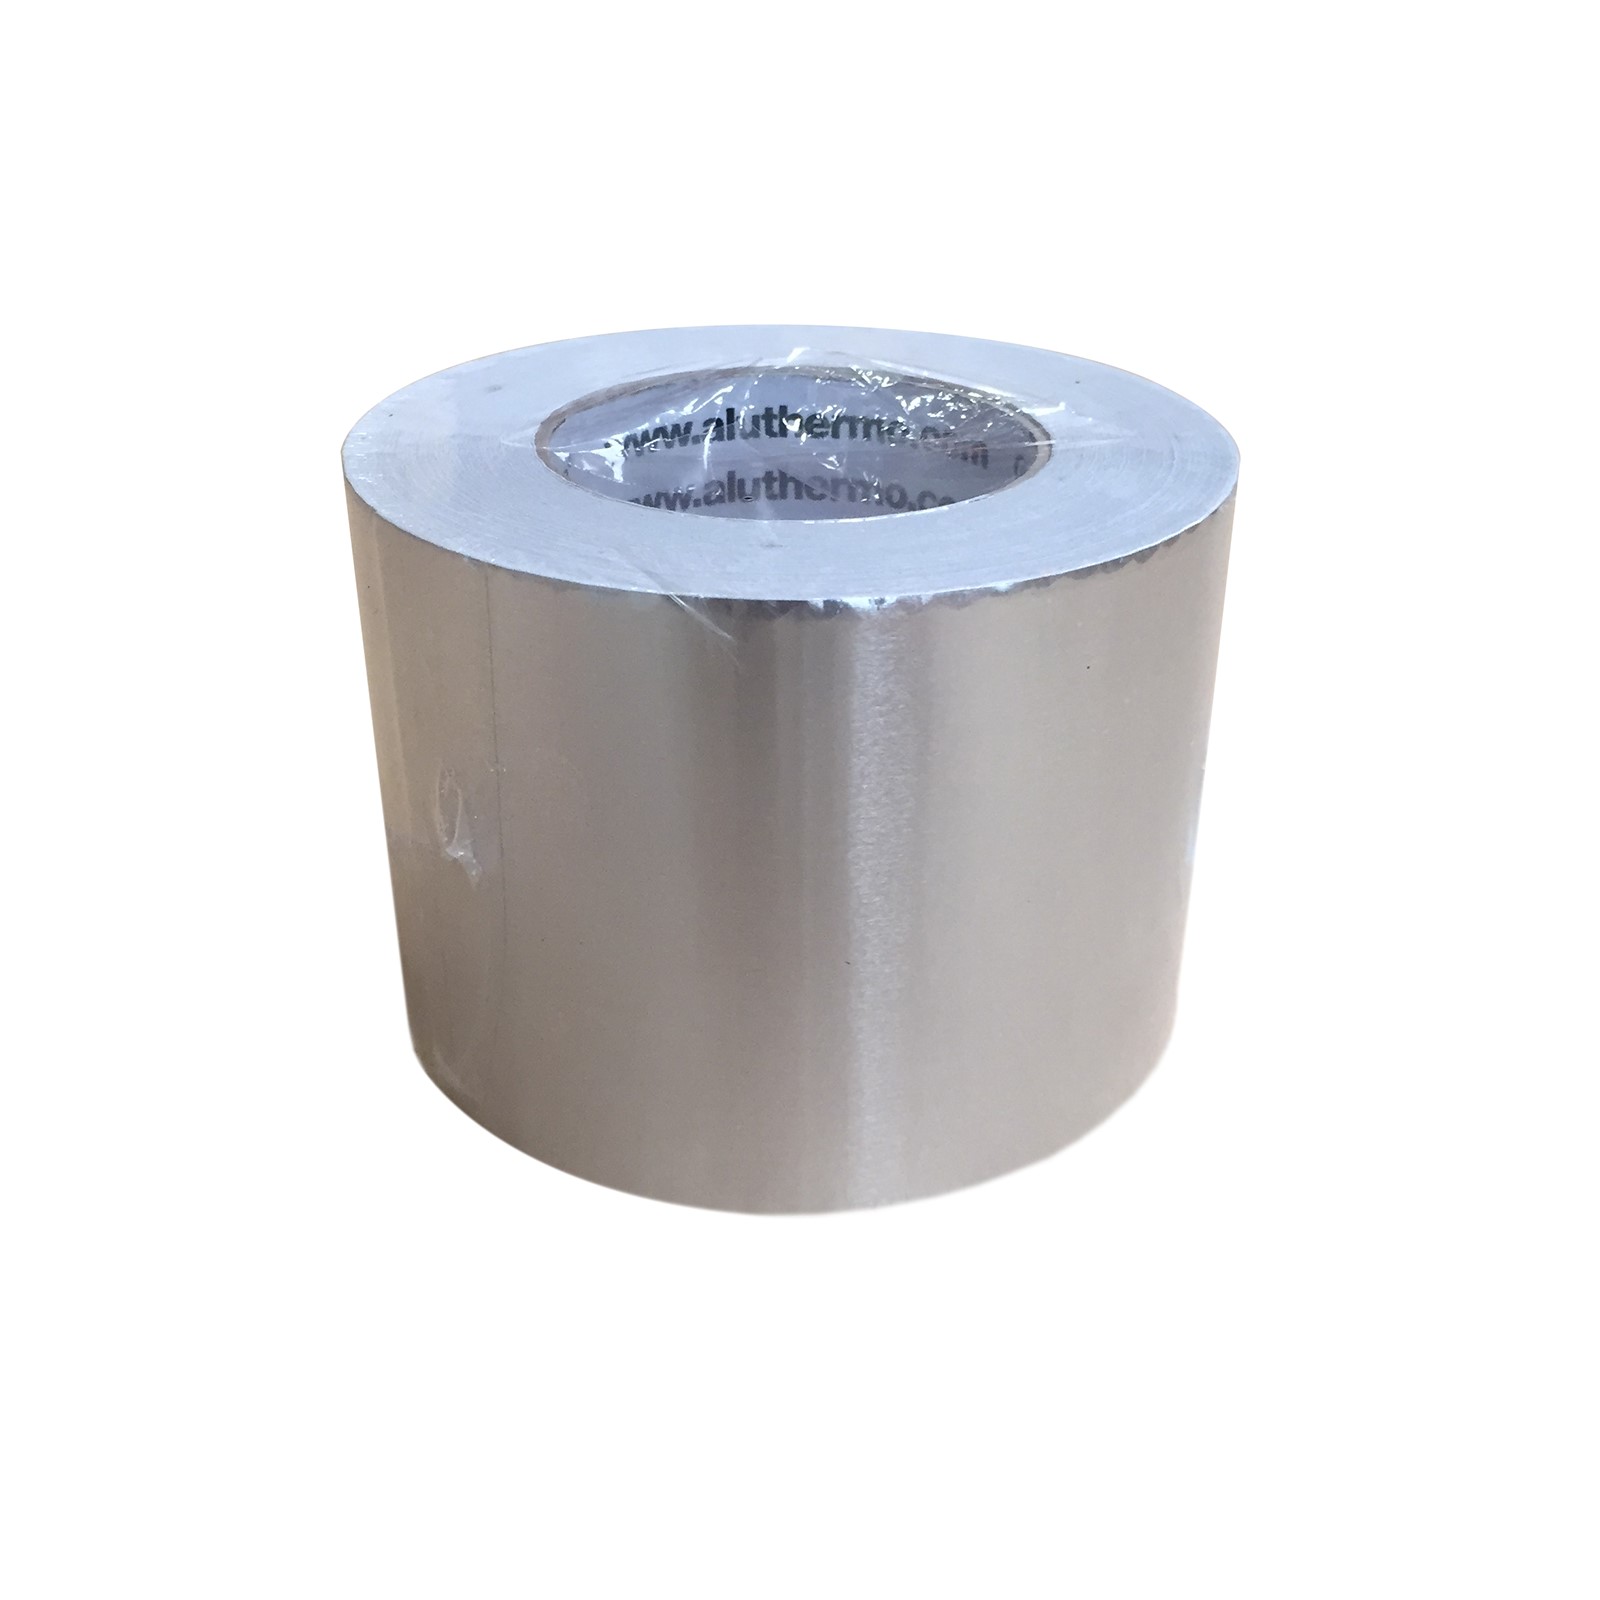 https://www.diffusionmenuiserie.be/assets/ac1ca385-06cf-4196-b403-bc47387406c8/186259-aluthermo-adhesive-tape-alu-100mm-x-50m-1.jpg